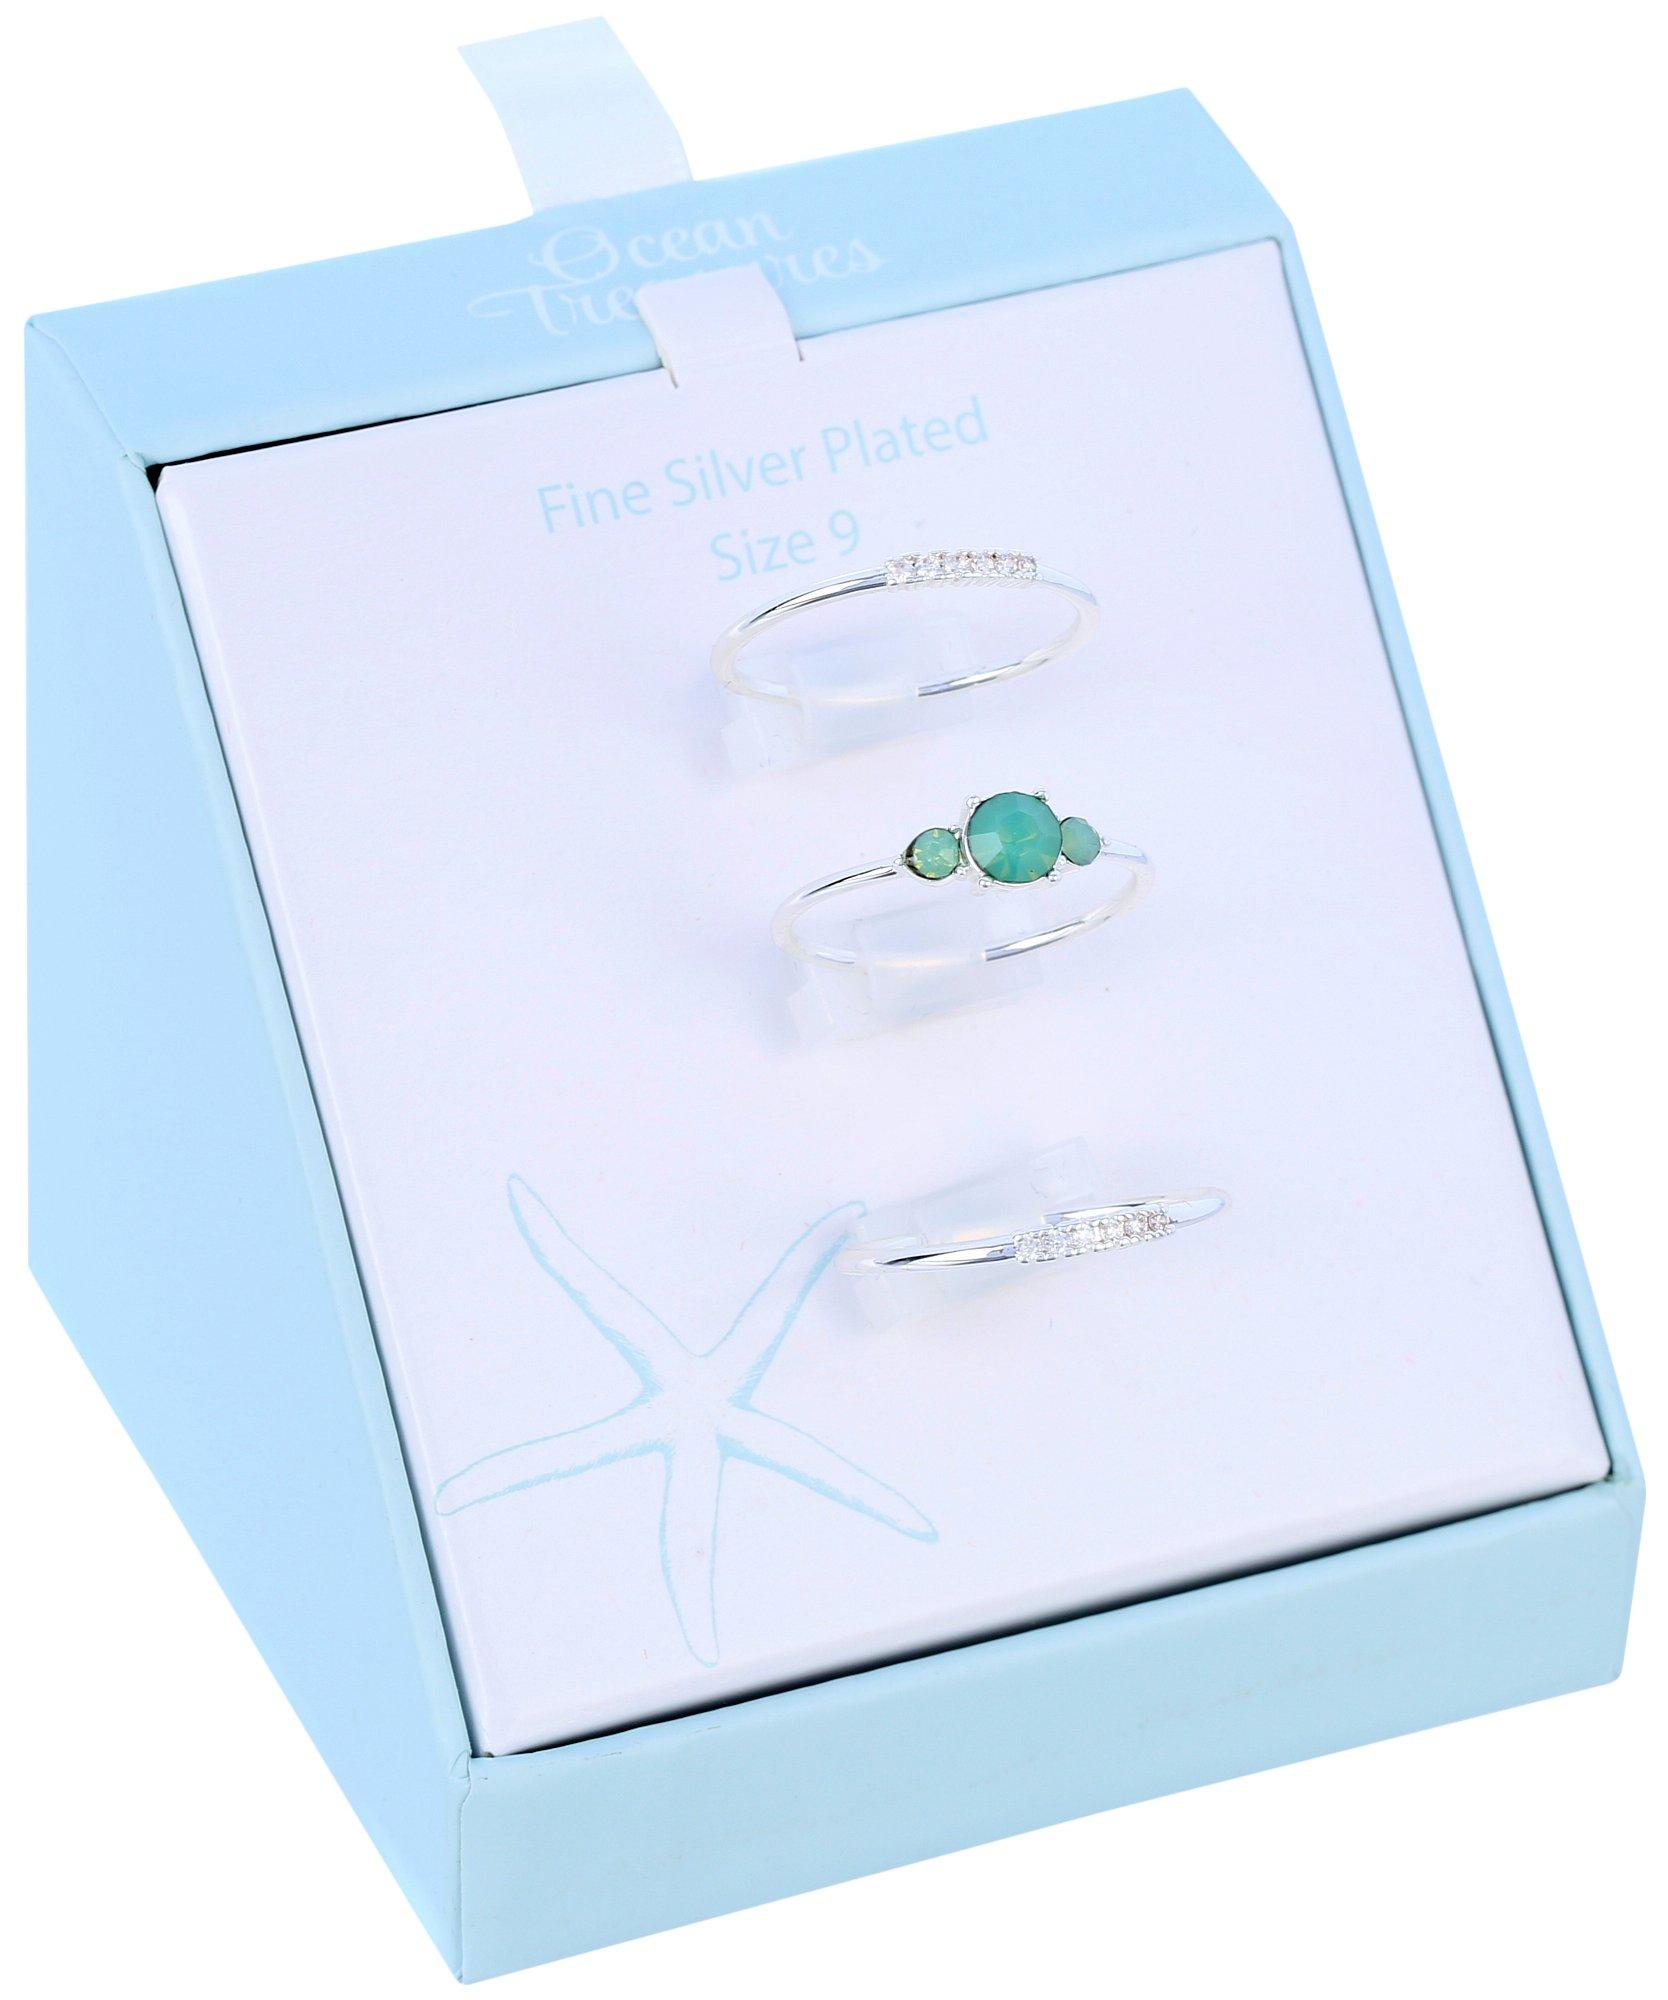 3 Pc. Fine Silver Plated Ring Set